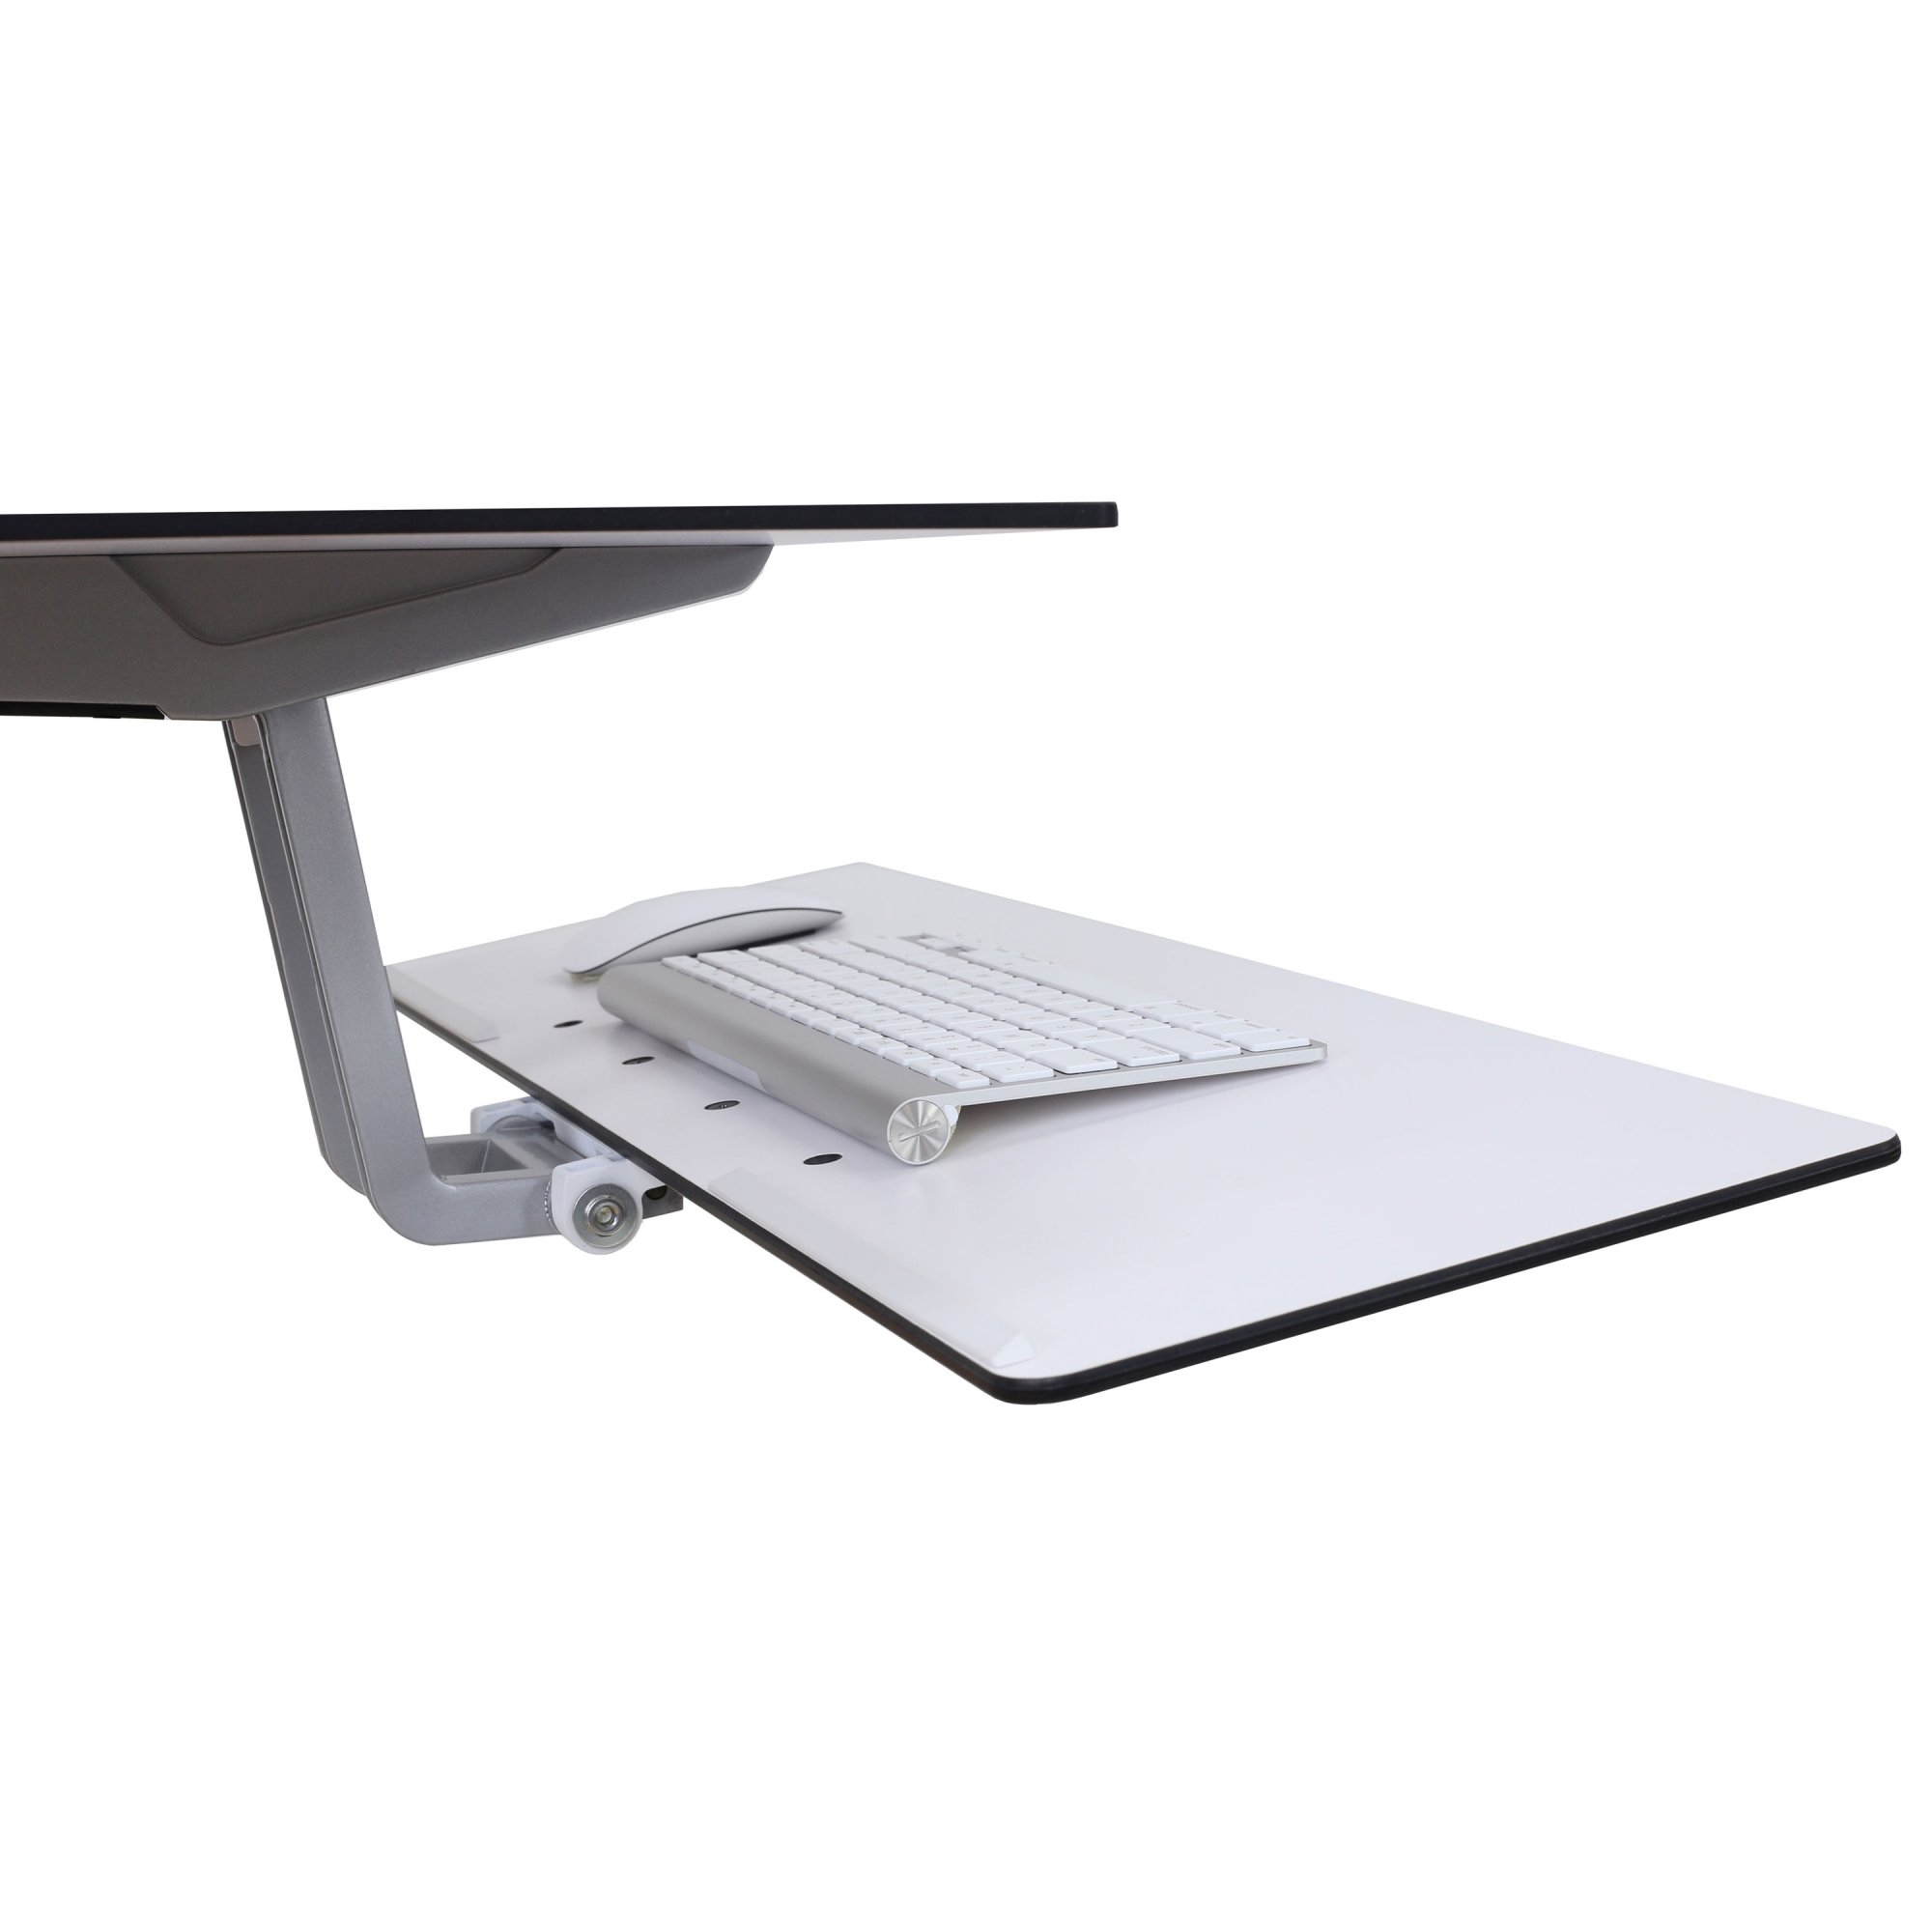 Ergotron 33-350-211 WorkFit-S, Single LD with Worksurface